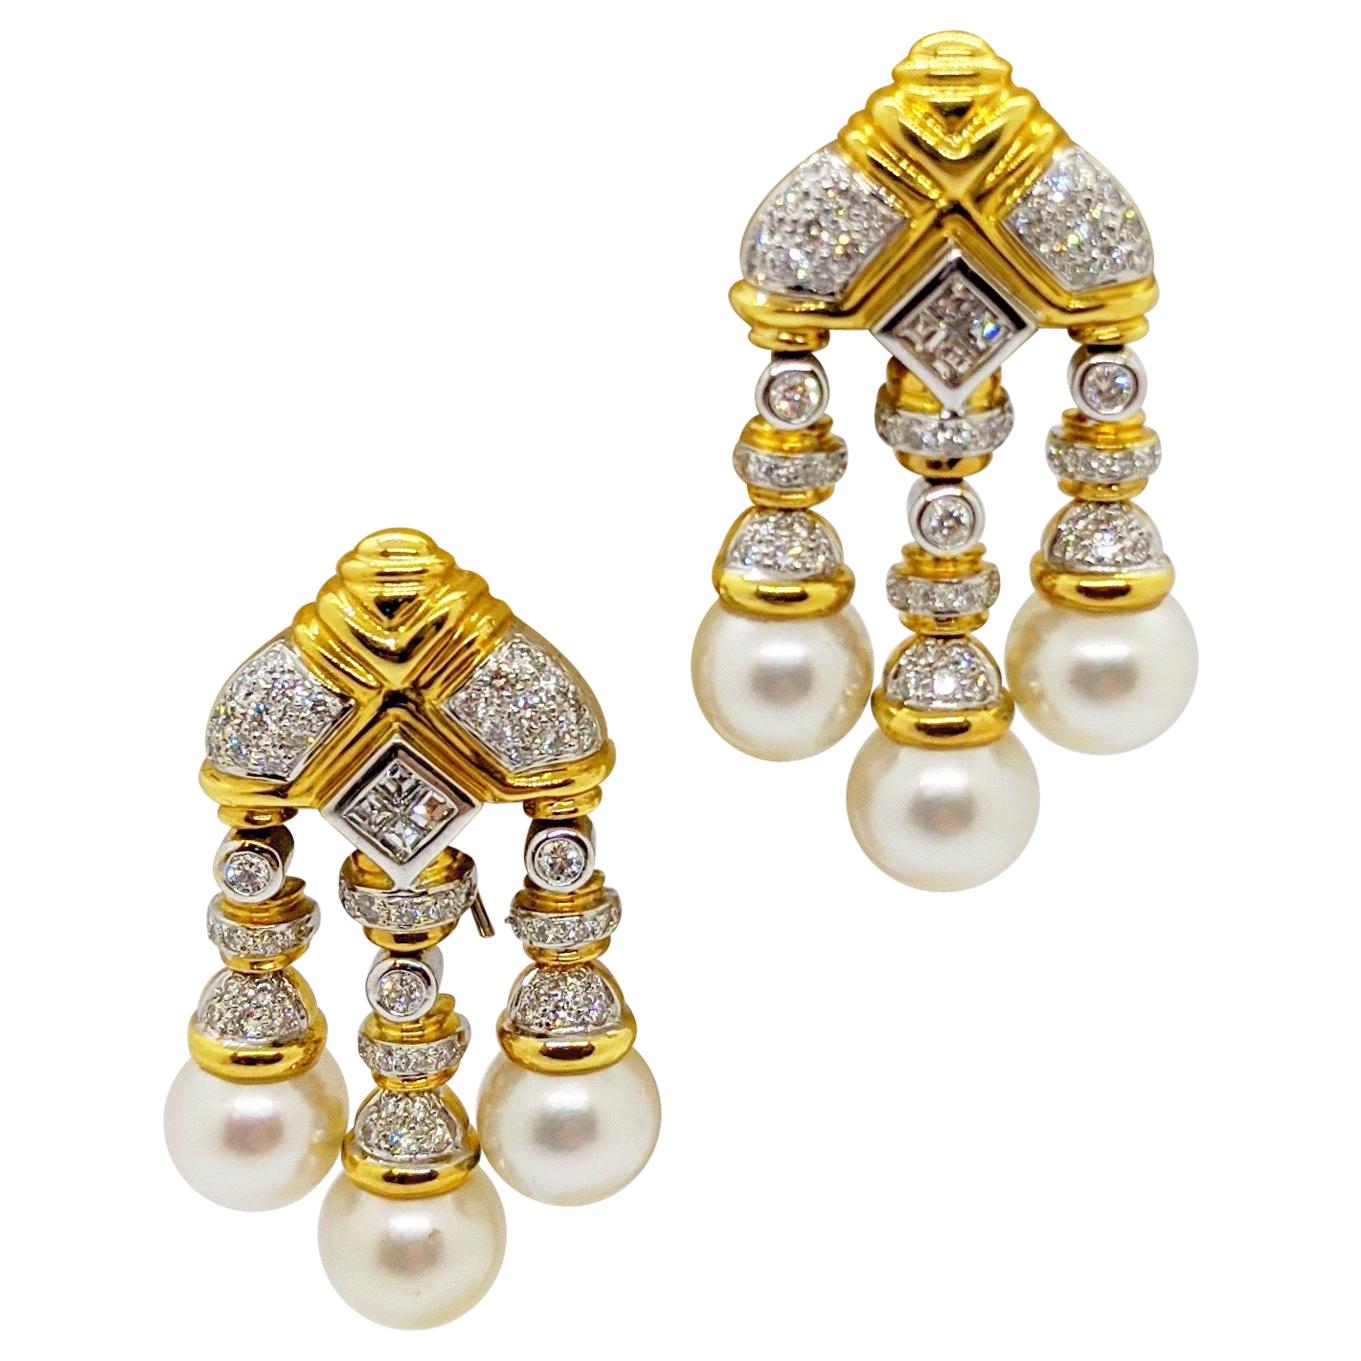 18 Karat Yellow & White Gold, Earrings with South Sea Pearls & 2.74Ct. Diamonds